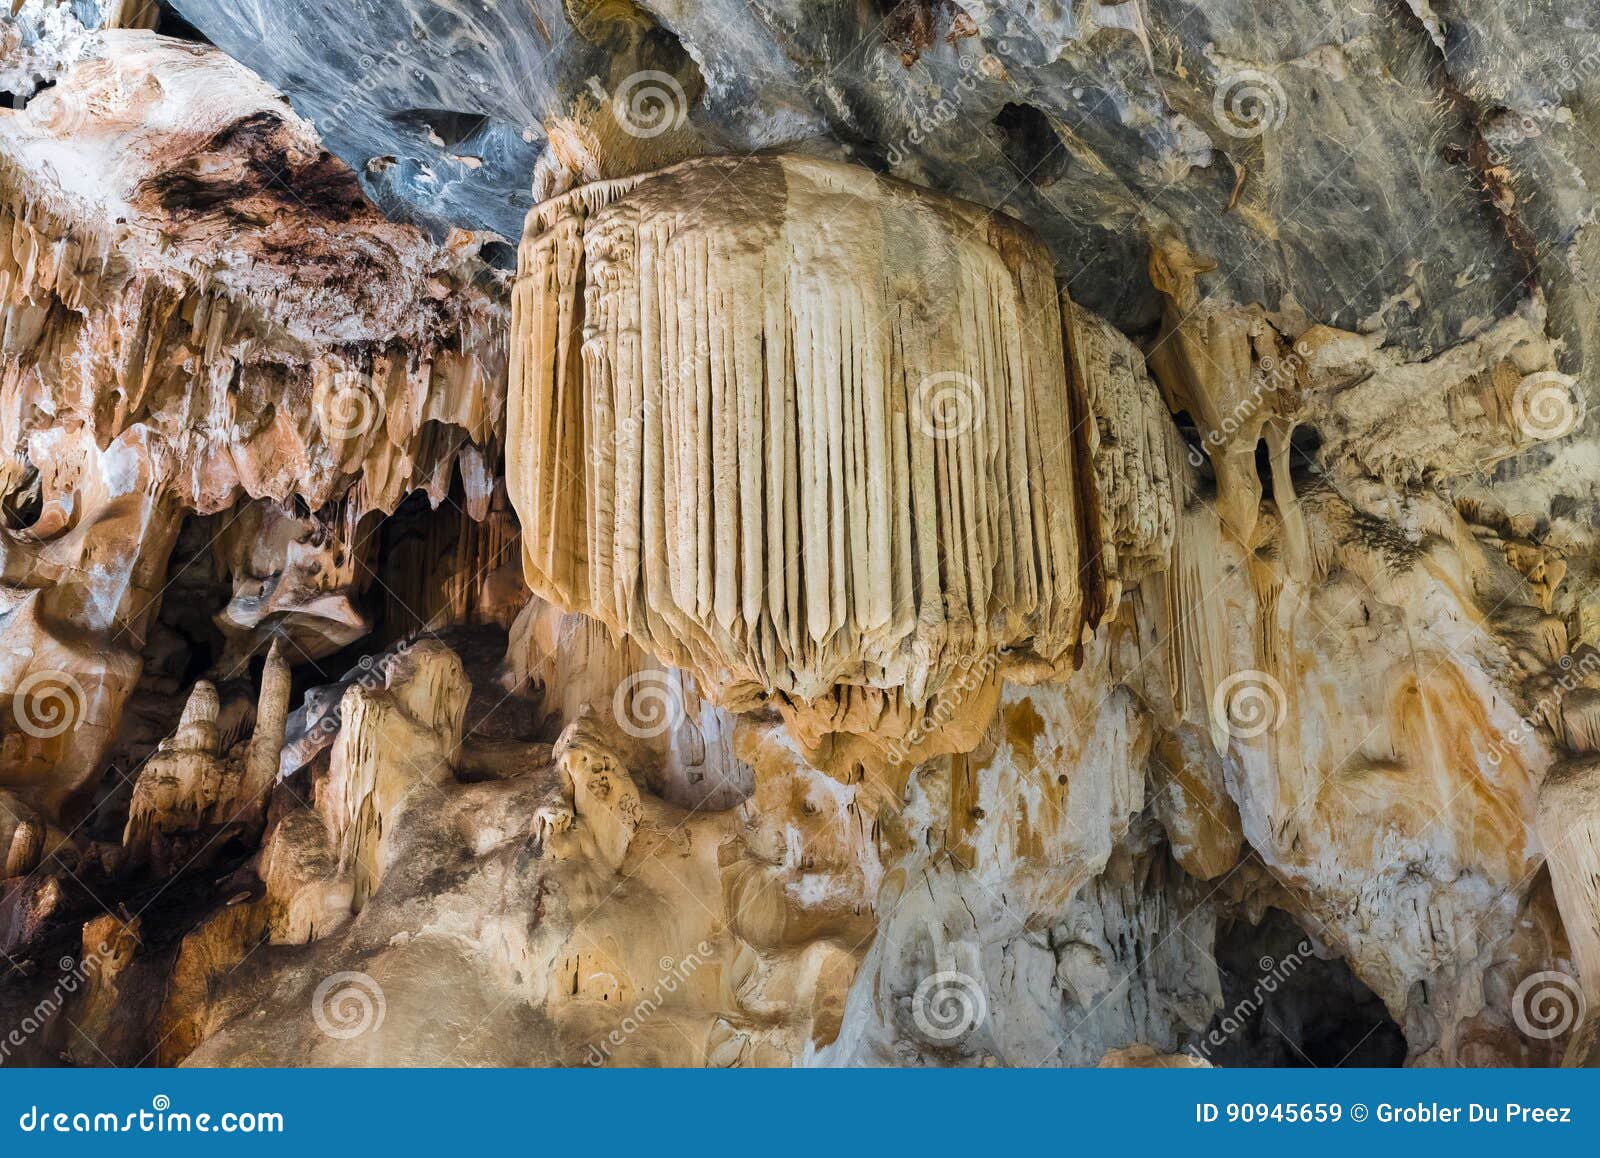 stalactites in the van zyl hall in the cango caves